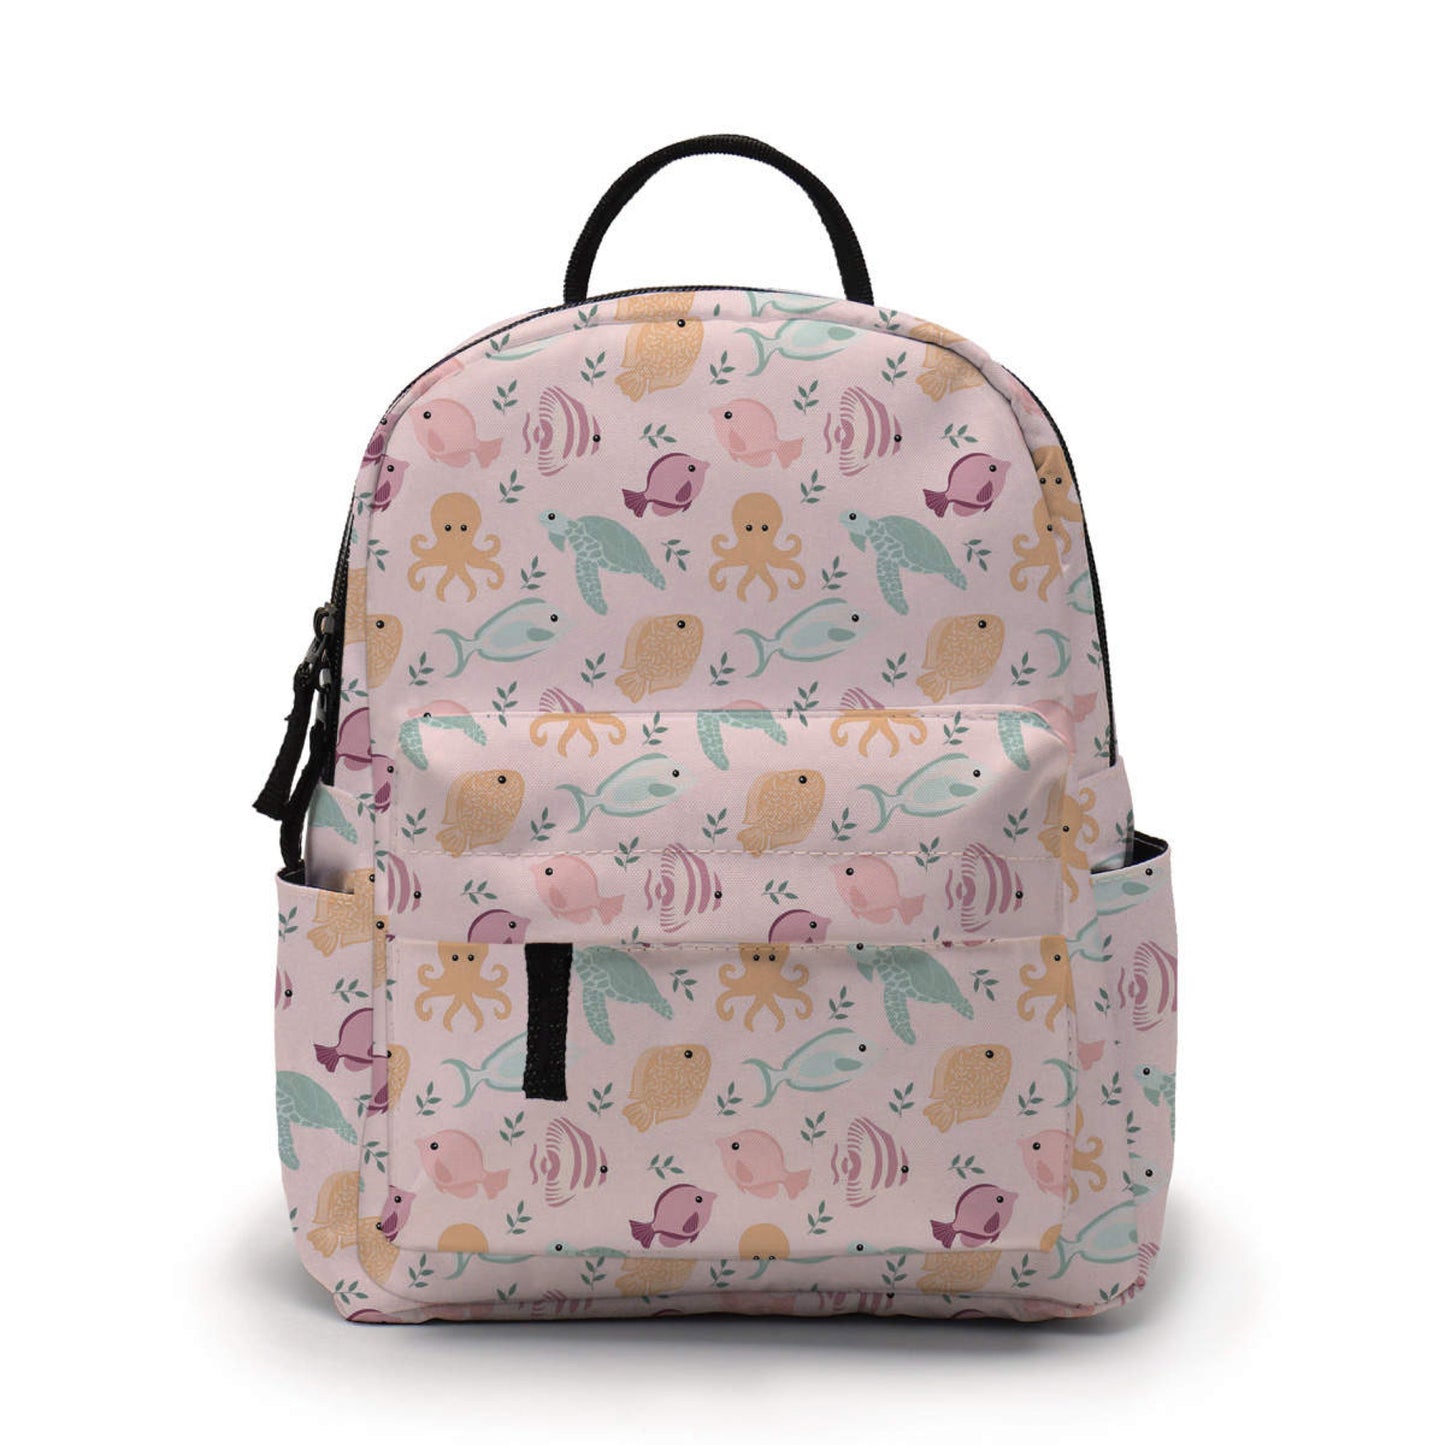 Mini Backpack - Under The Sea Pink